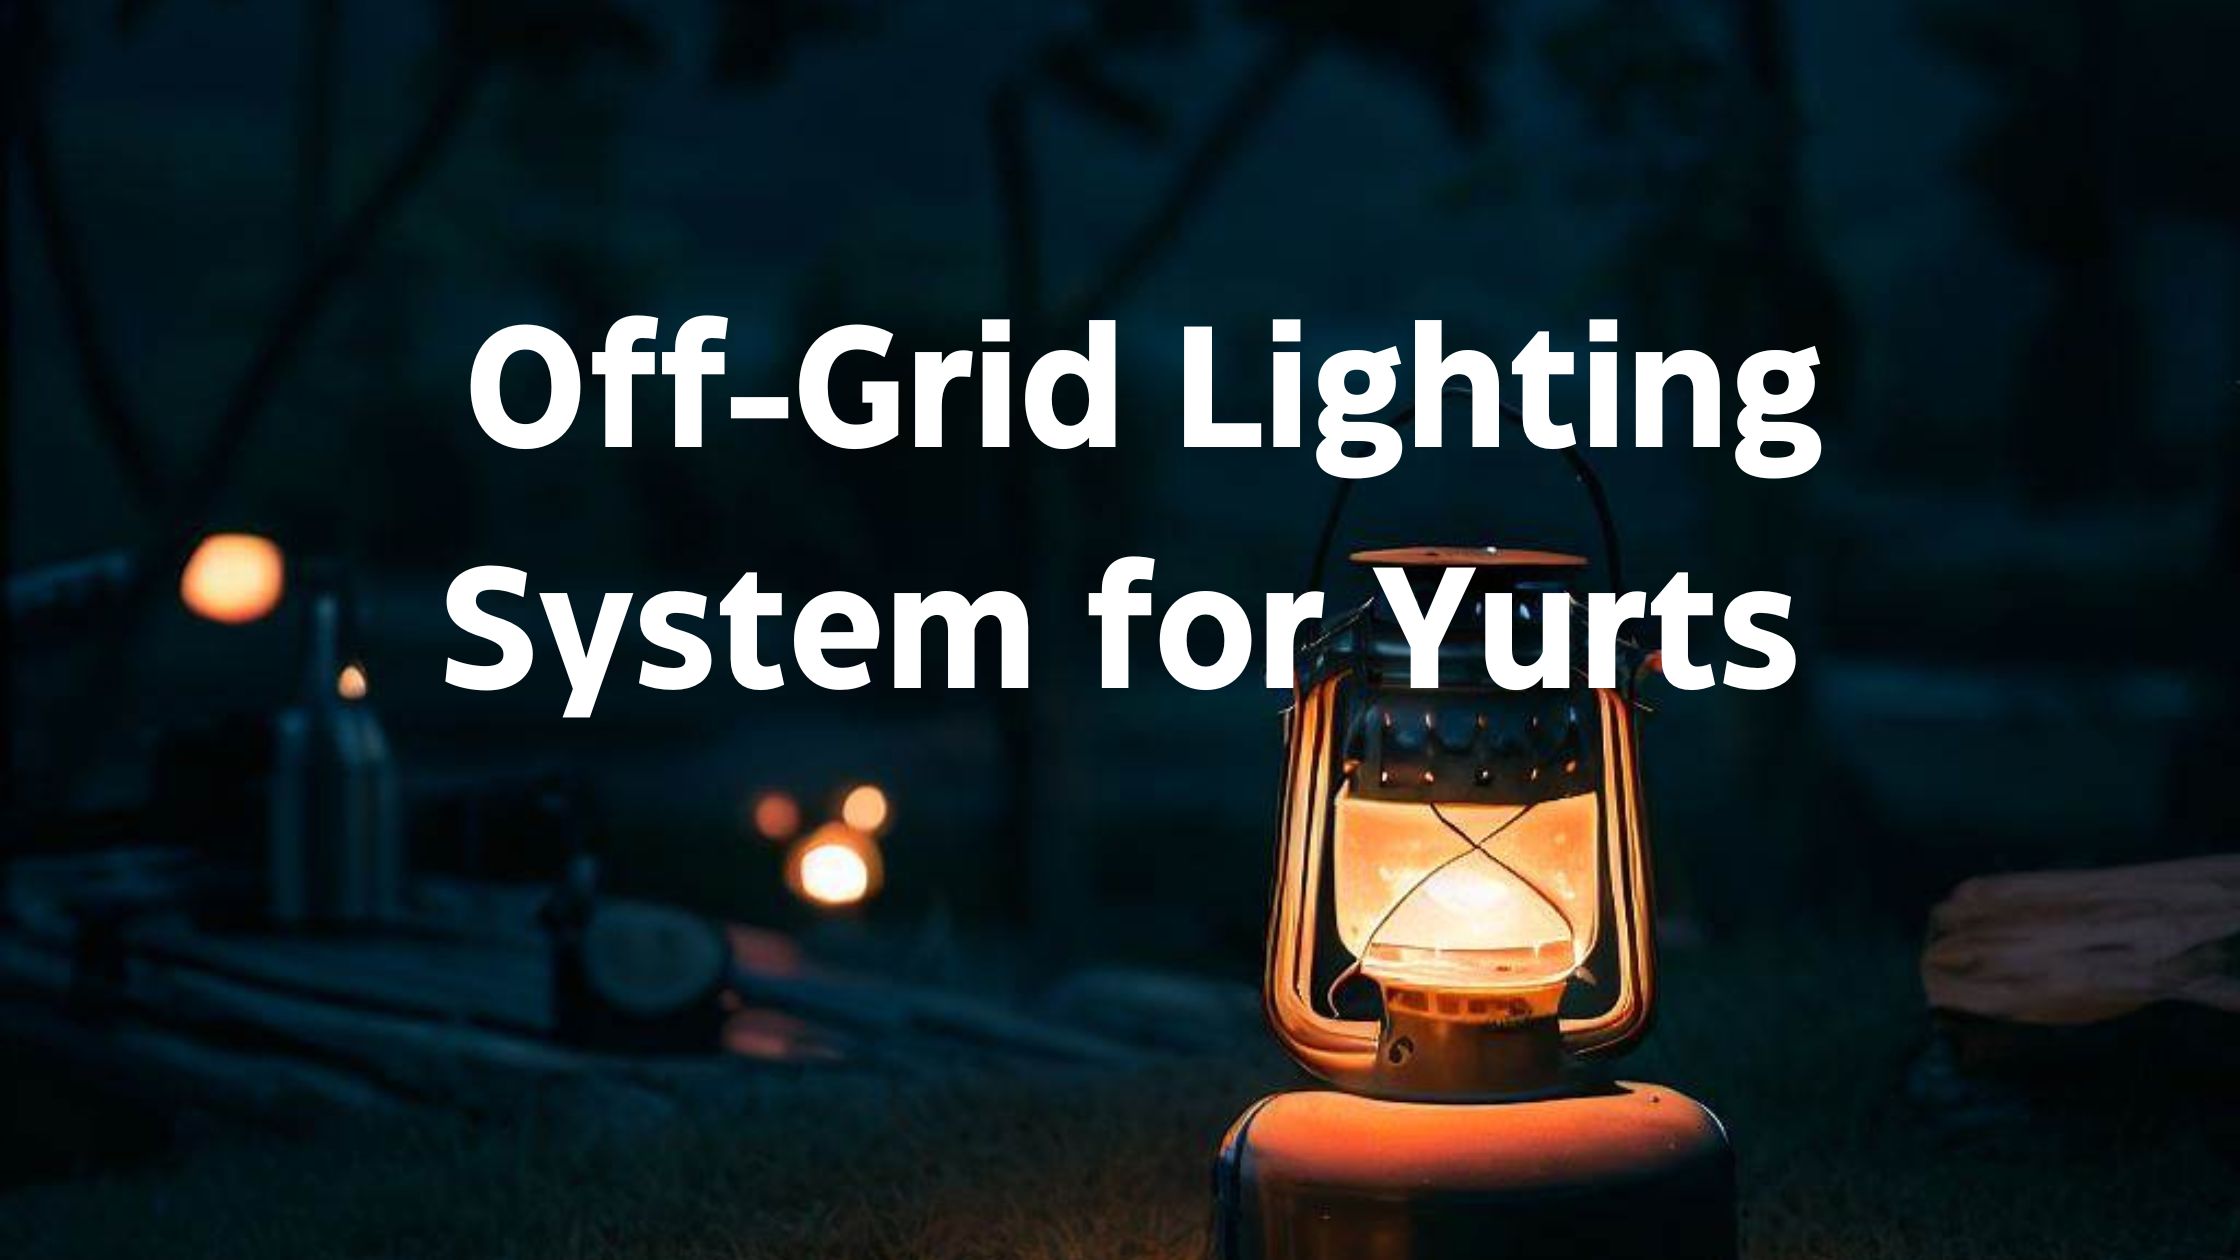 off grid lighting for yurts and tents